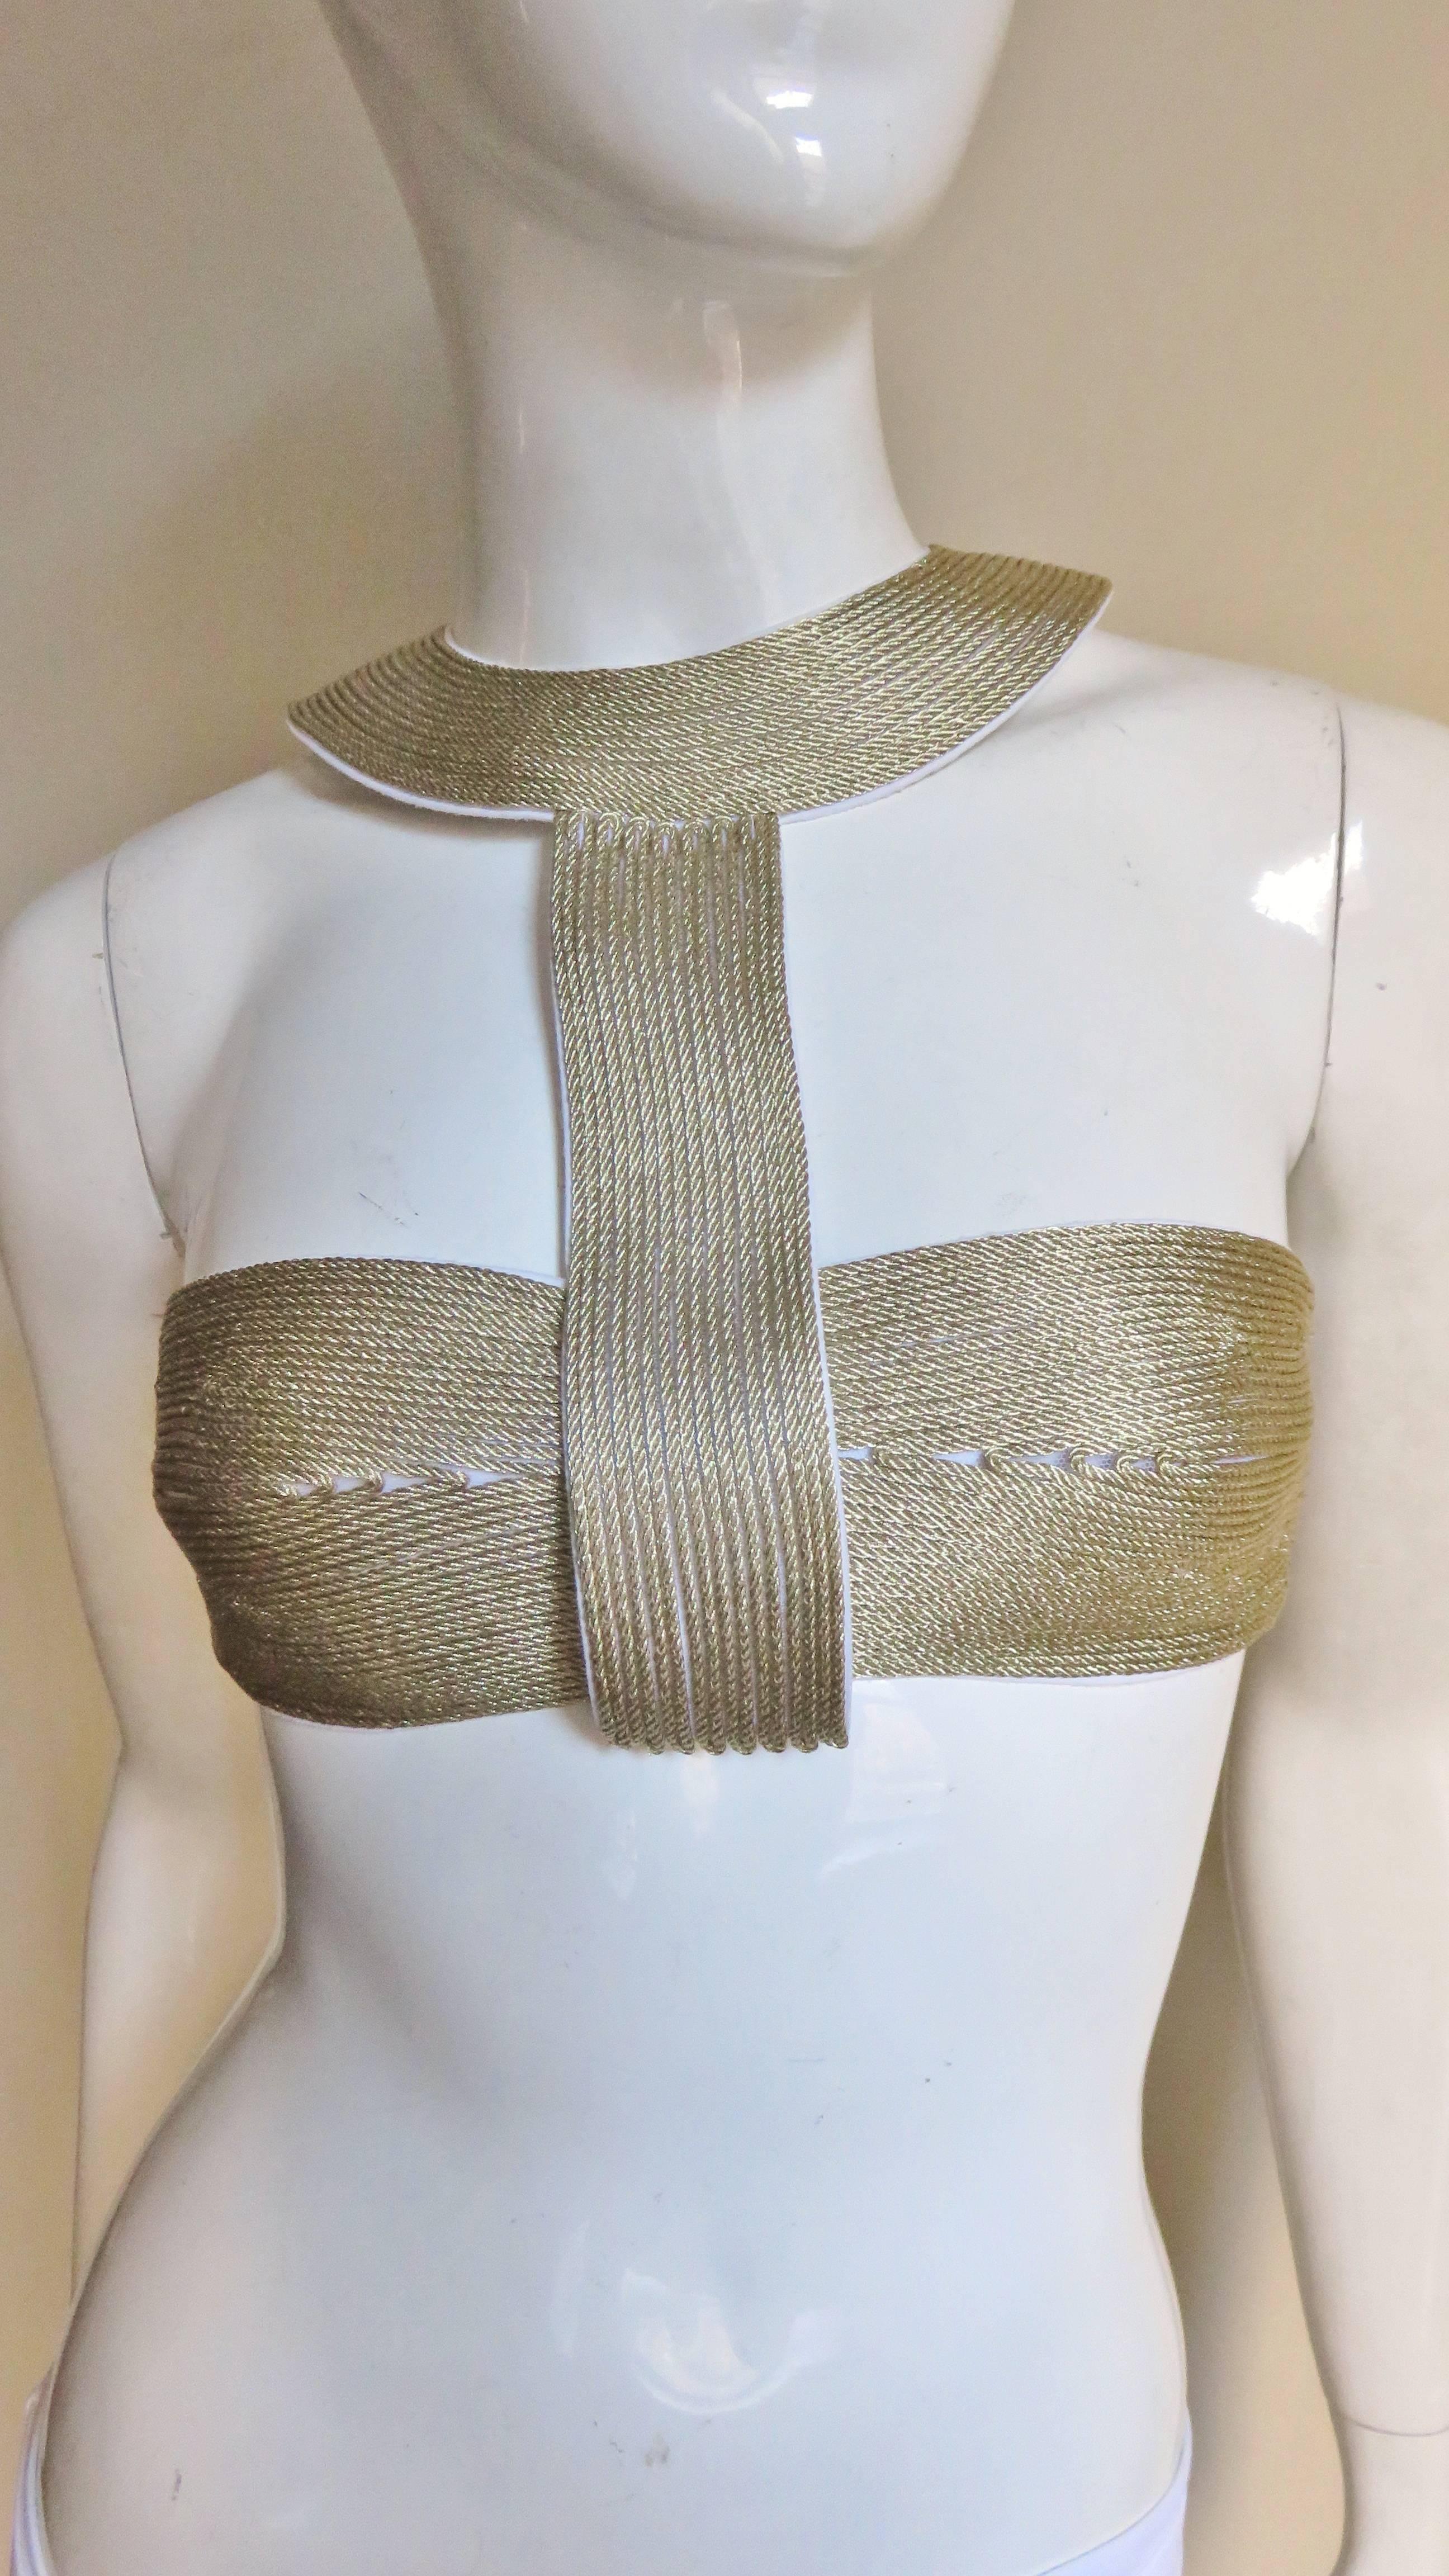 This is a gorgeous bikini by La Perla in white and gold.  The top is comprised of 2 pieces, a bandeau which can be worn on it's own and a Cleopatra collar consisting of rows of gold braid (which the bandeau slides through).  Gorgeous!  The back of